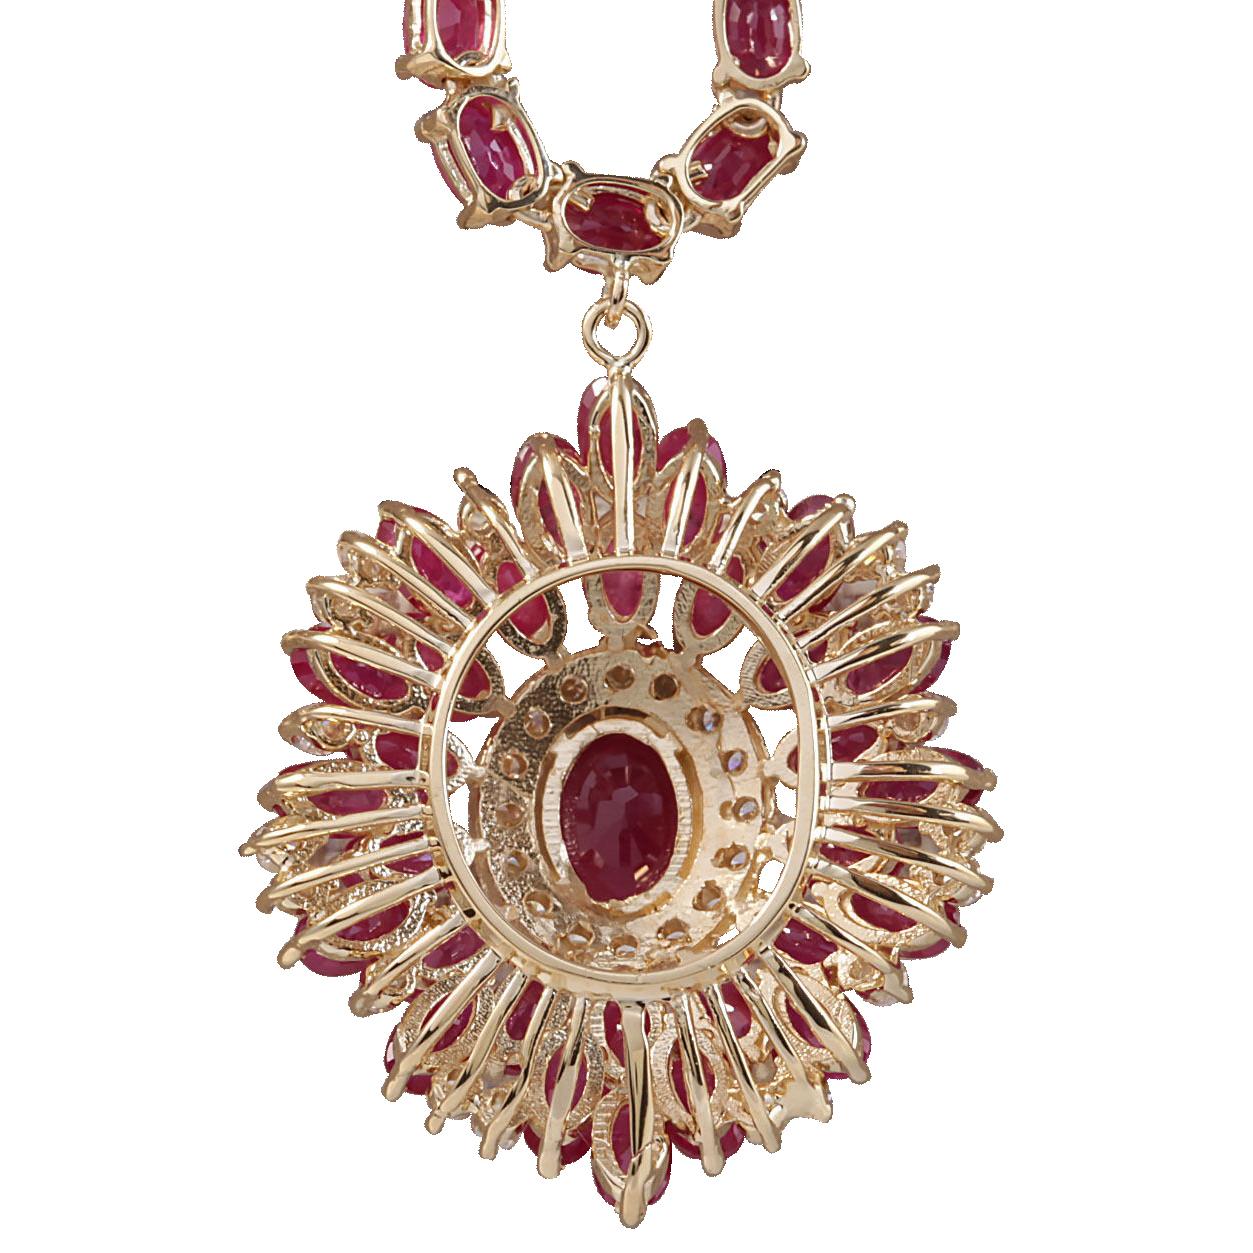 Stamped: 18K 
Total Necklace Weight: 25.9 Grams 
Diamond Weight: 1.00 carat. VS2-SI1 clarity / F-G color 
Center Gemstone Weight: Total Natural Center Ruby Weight is 1.00 Carat (Measures: 8.00x6.00 Millimeters) 
Side Gemstone Weight: Total Natural